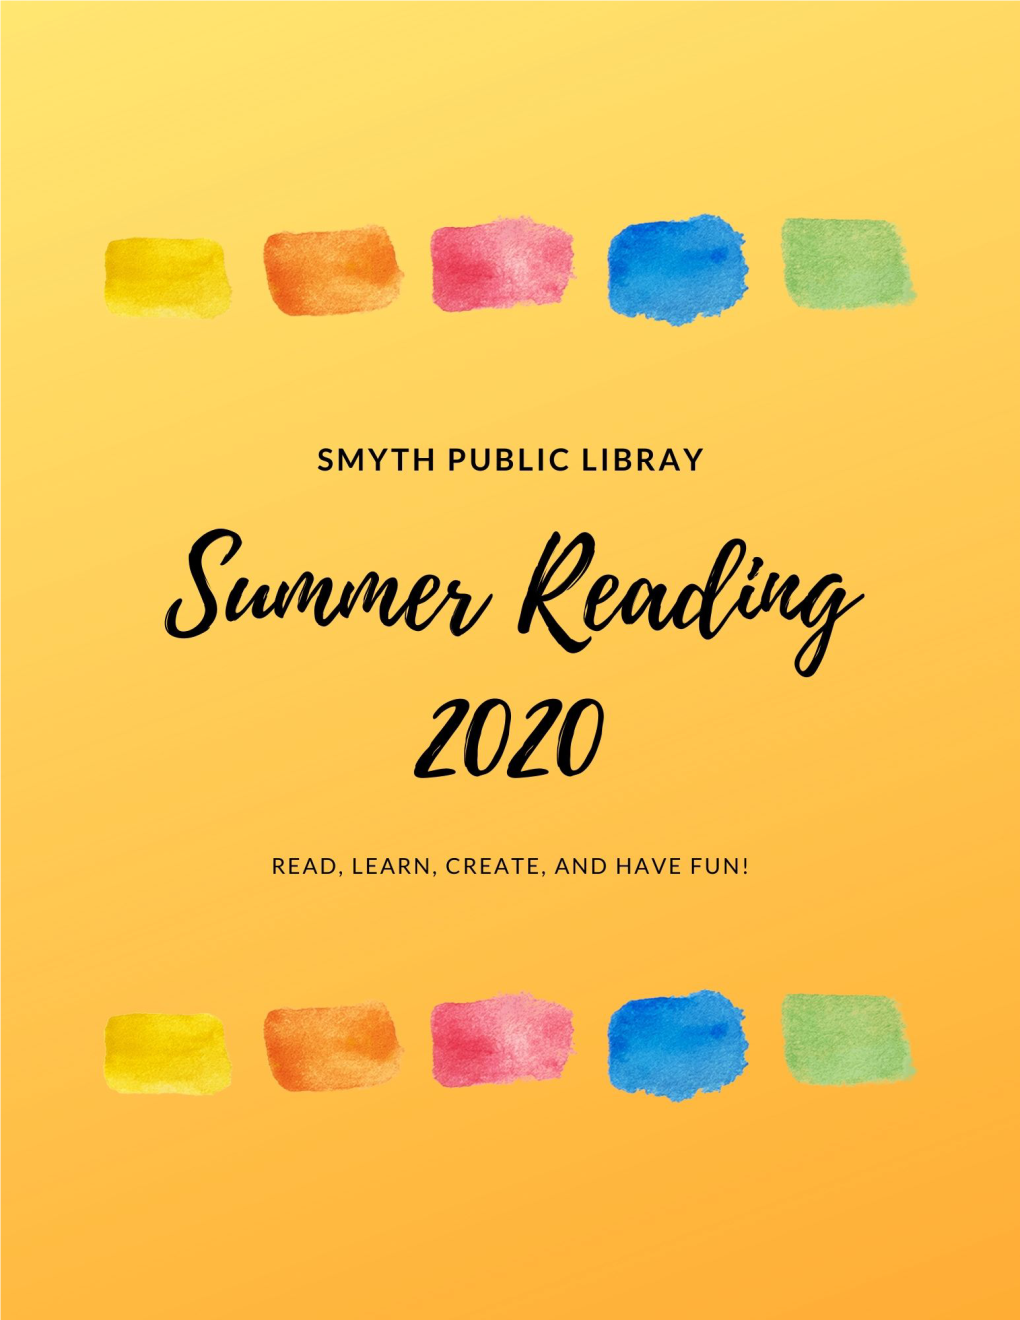 Smyth Public Library 2020 Summer Reading Program Smyth Public Library 2020 Summer Reading Program Table of Contents ——————————————————— Introduction